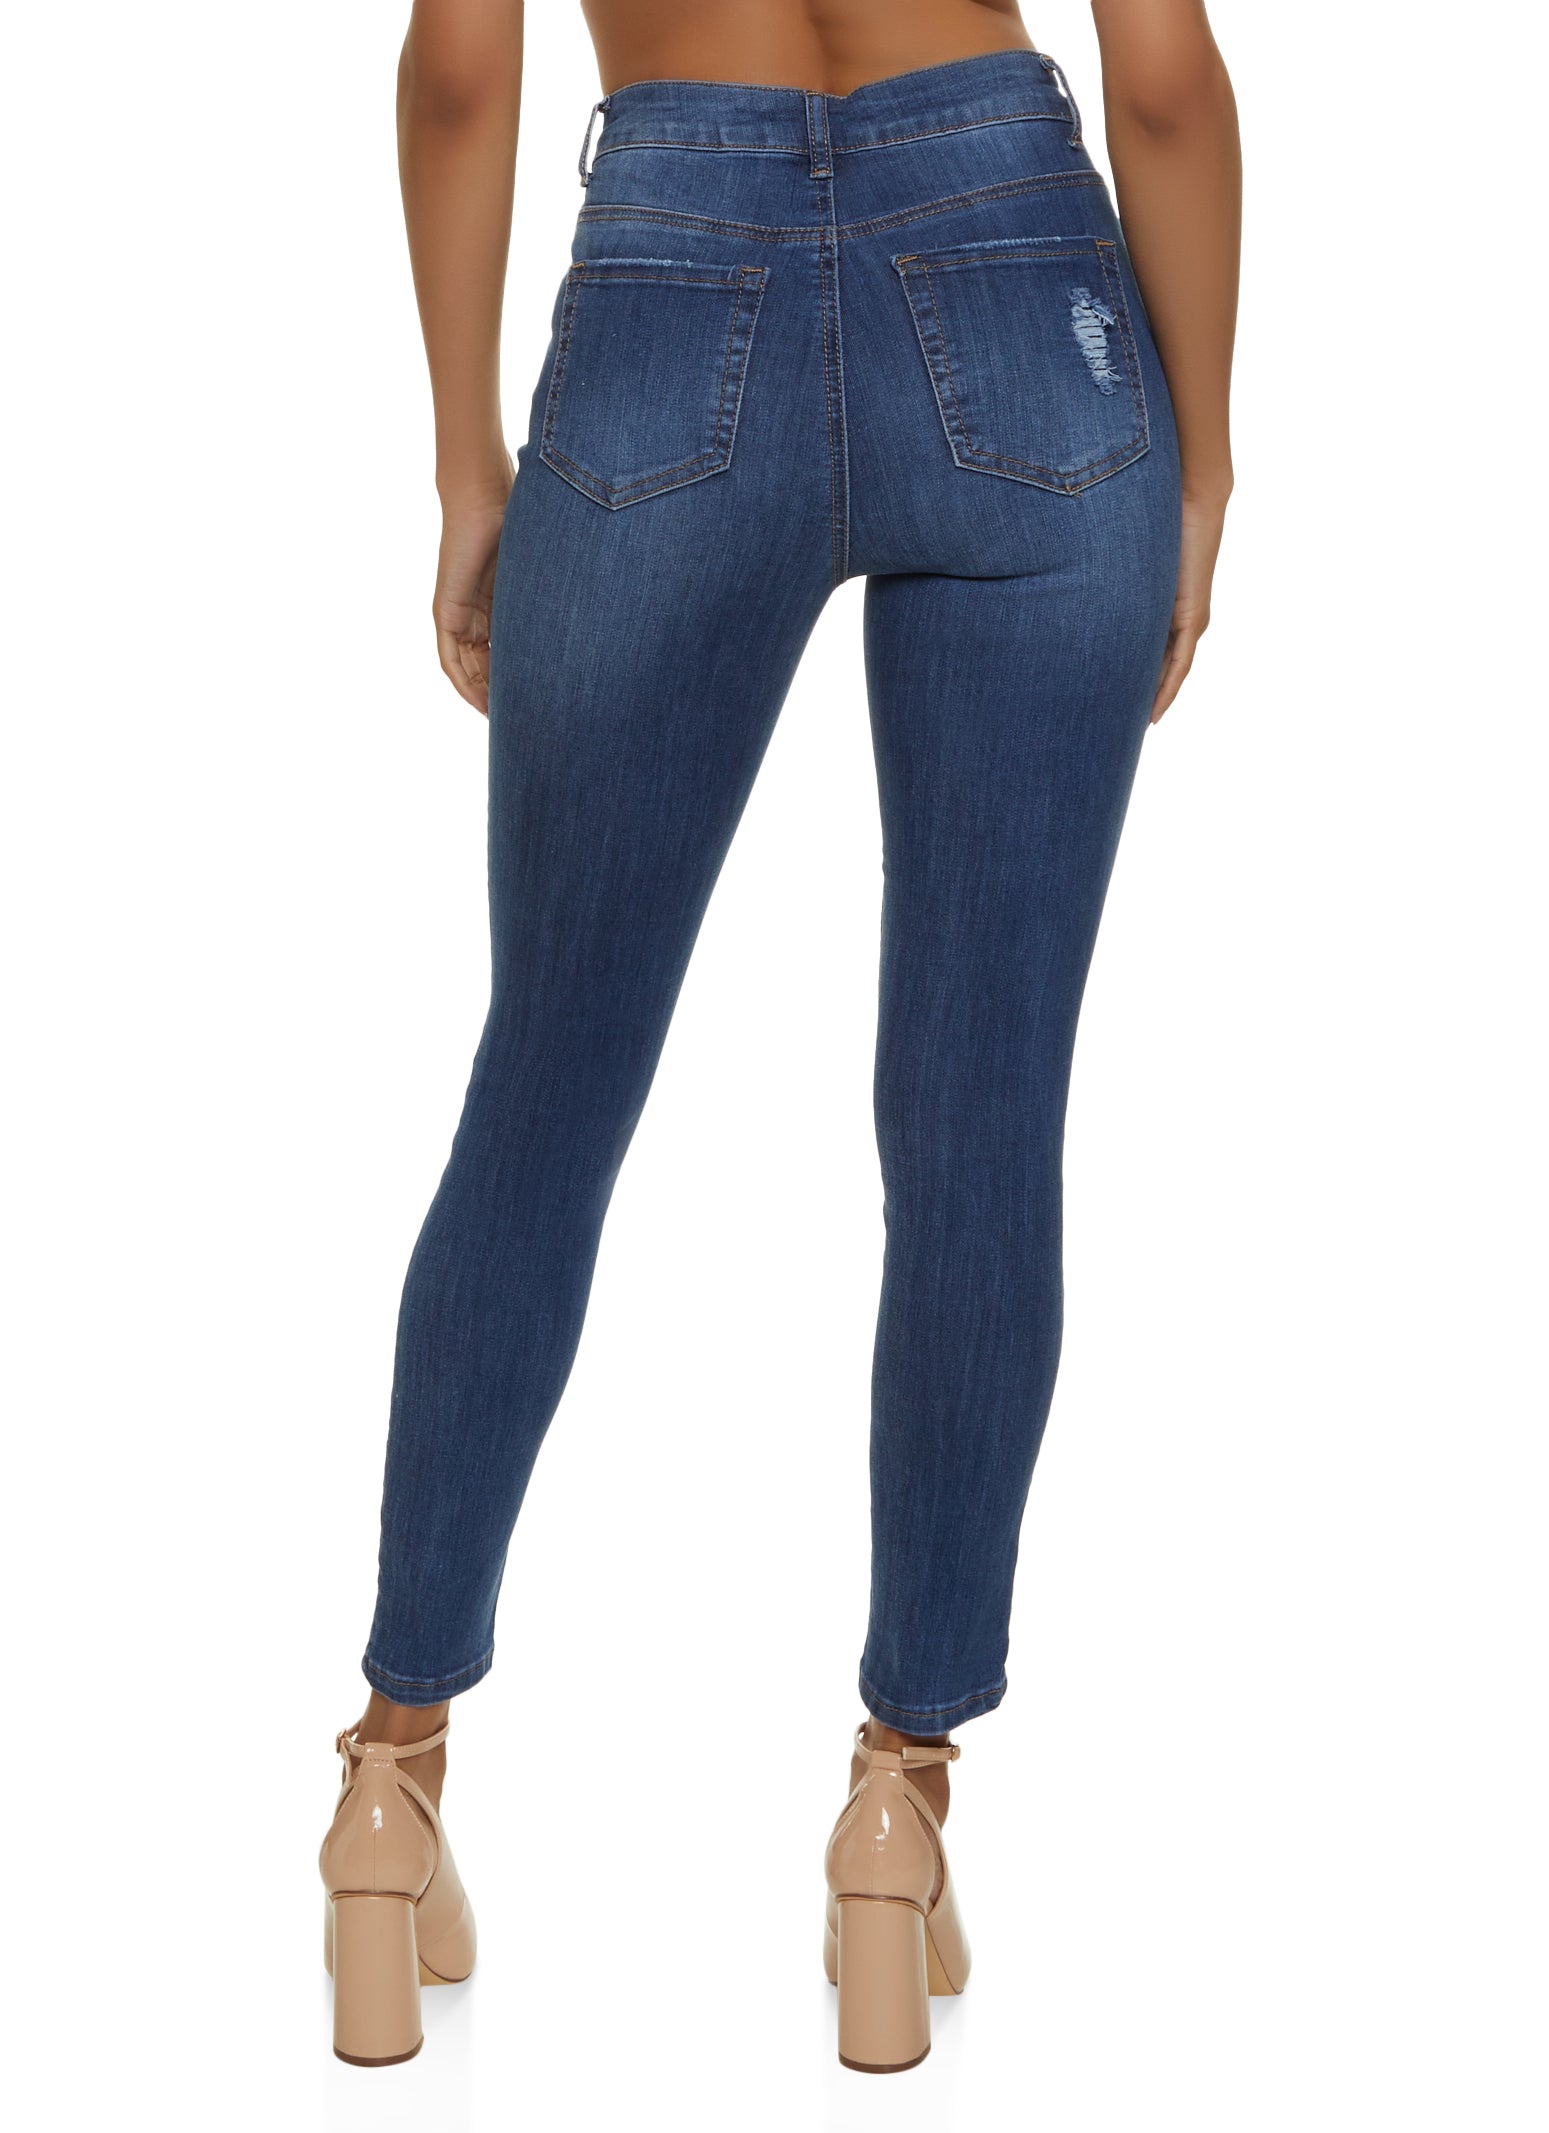 WAX Distressed High Waist Cropped Skinny Jeans